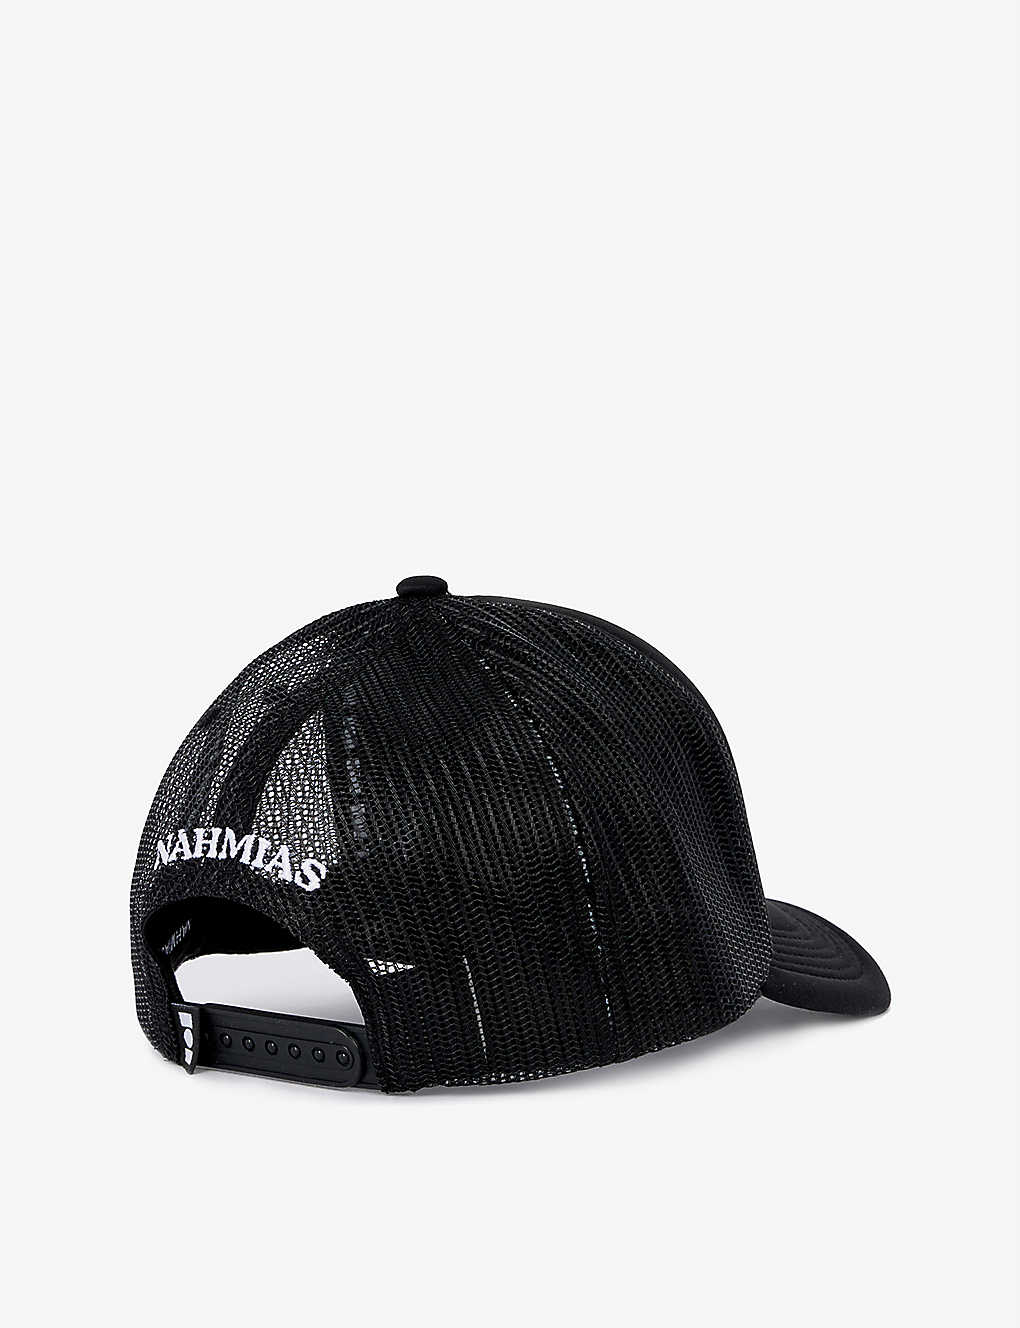 Embroidered Snapback Cap SLAVE